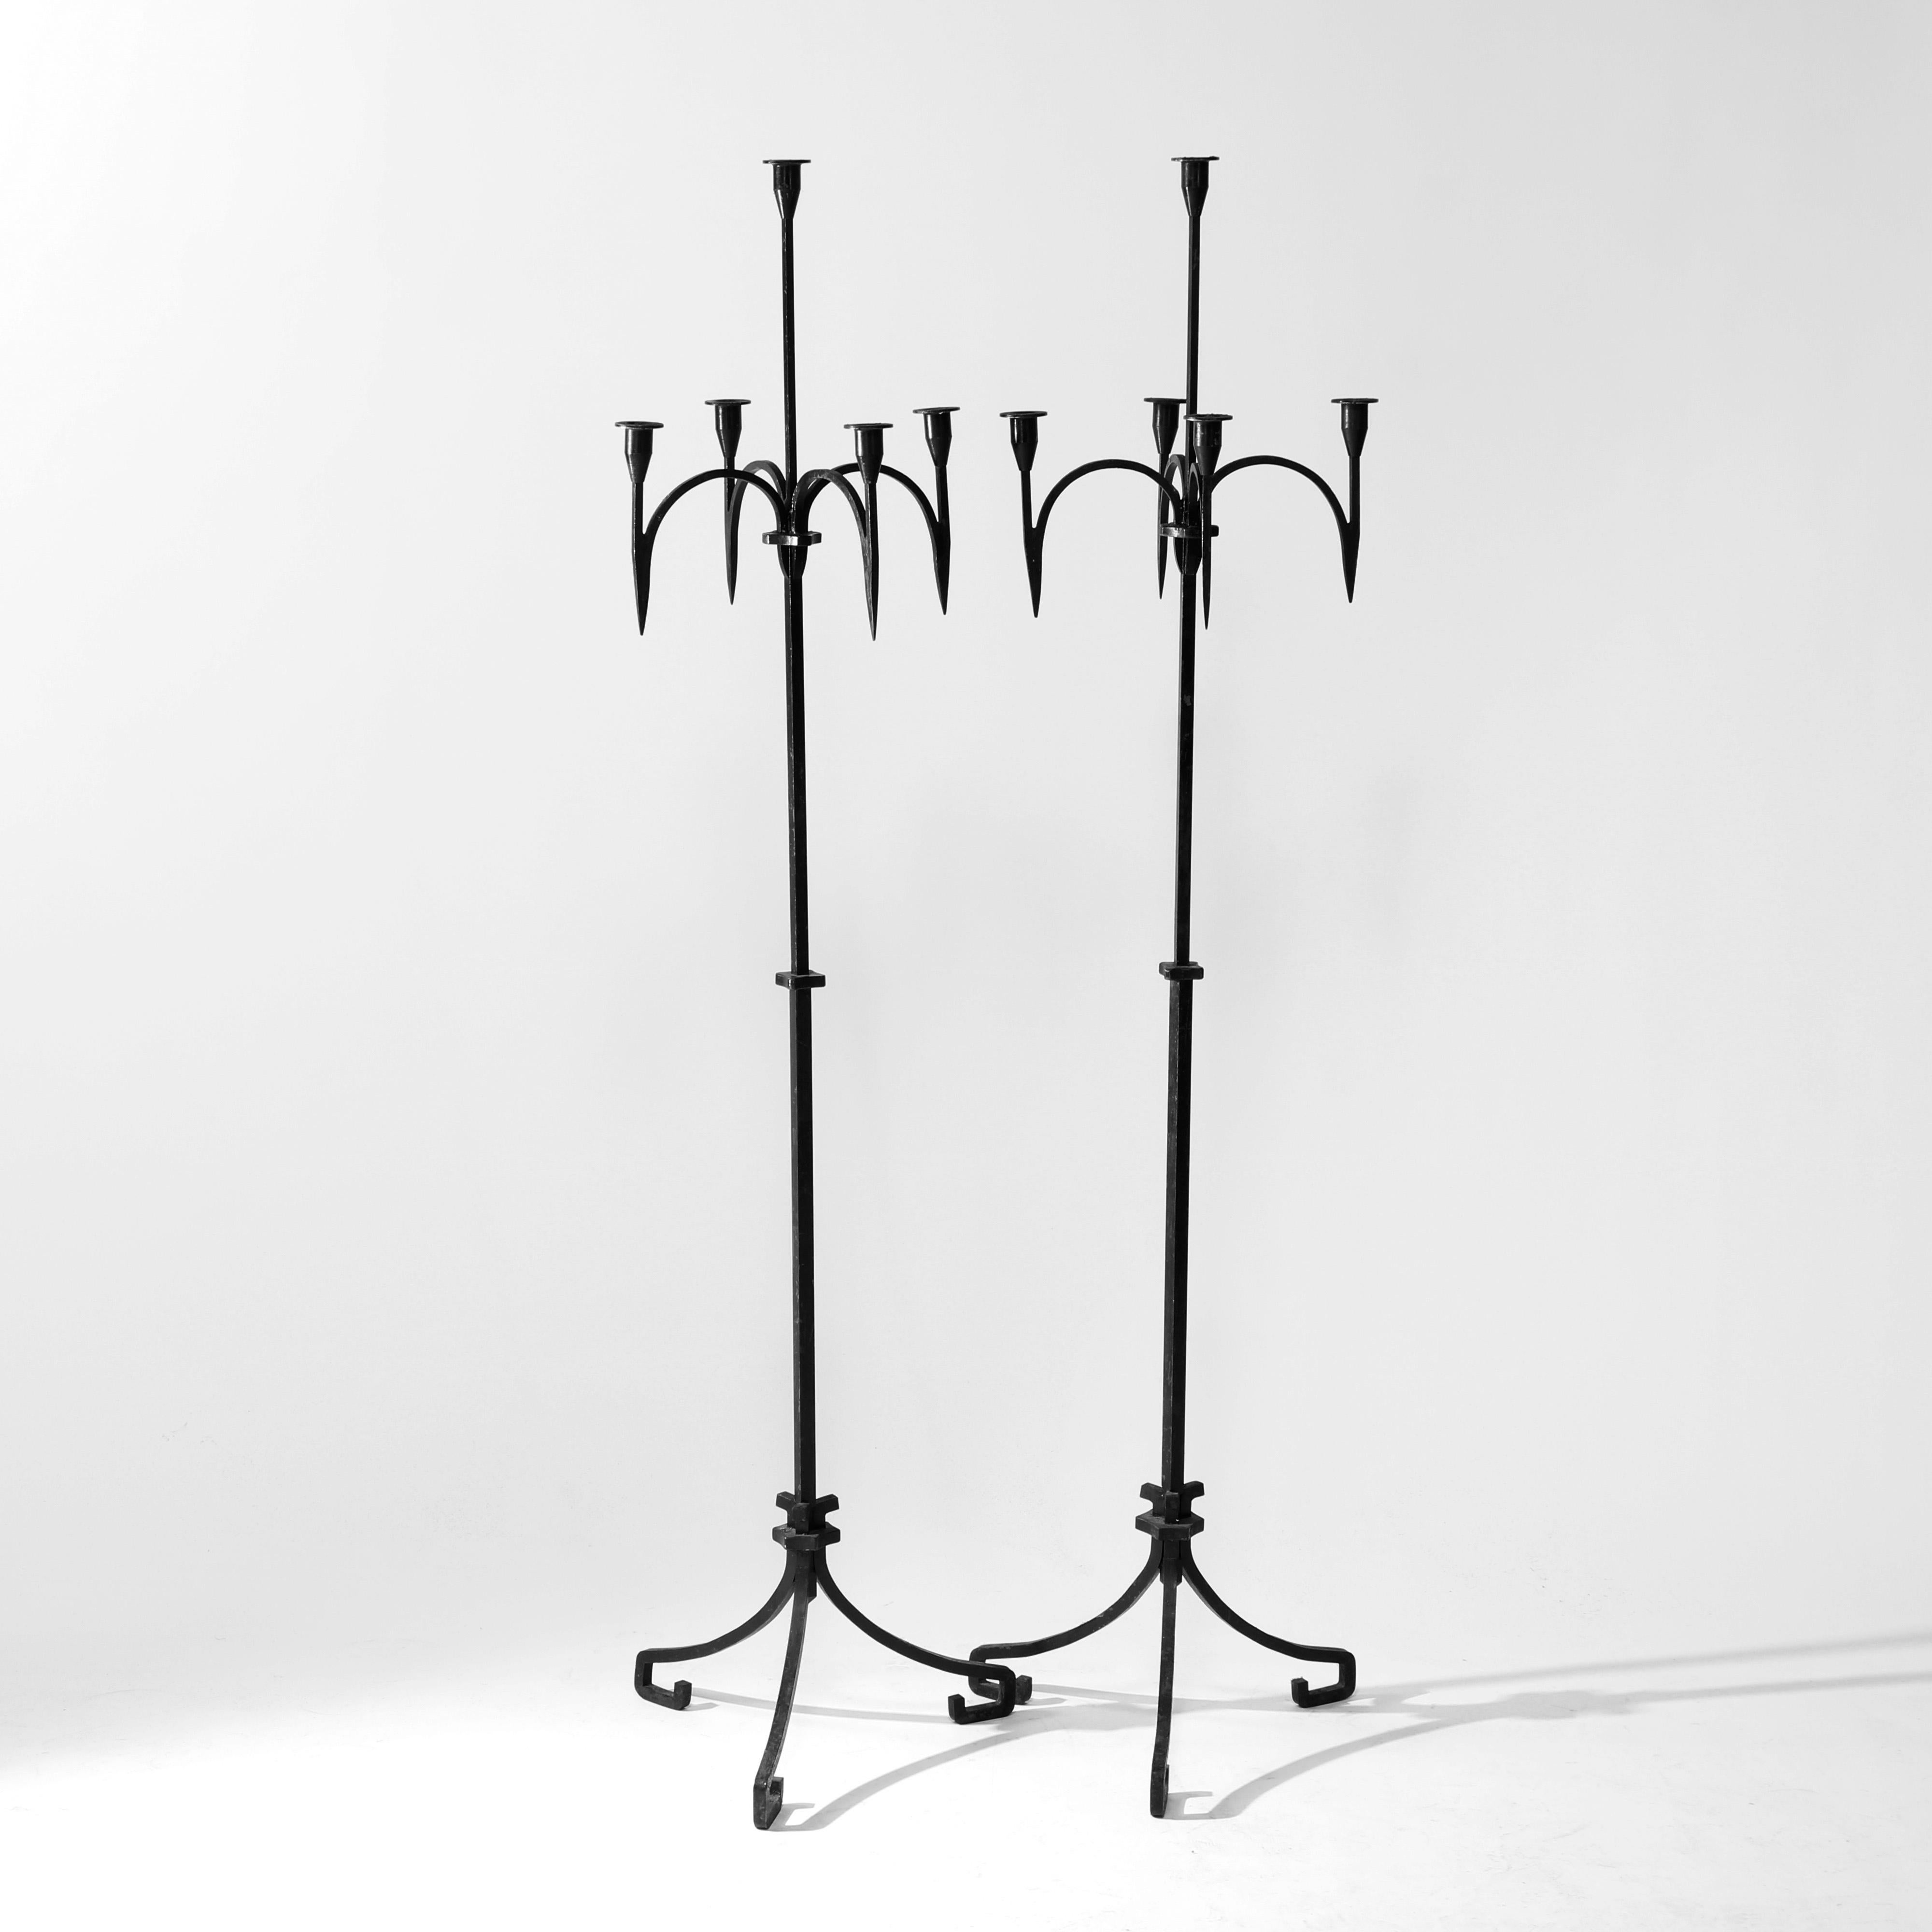 An antique pair of floor candelabra in the manner of Yellin offer wrought iron construction with central candle socket having four surrounding with down spires, raised on scroll form legs, c1910

Measures - 60.25'' H X 16'' W X 16'' D.